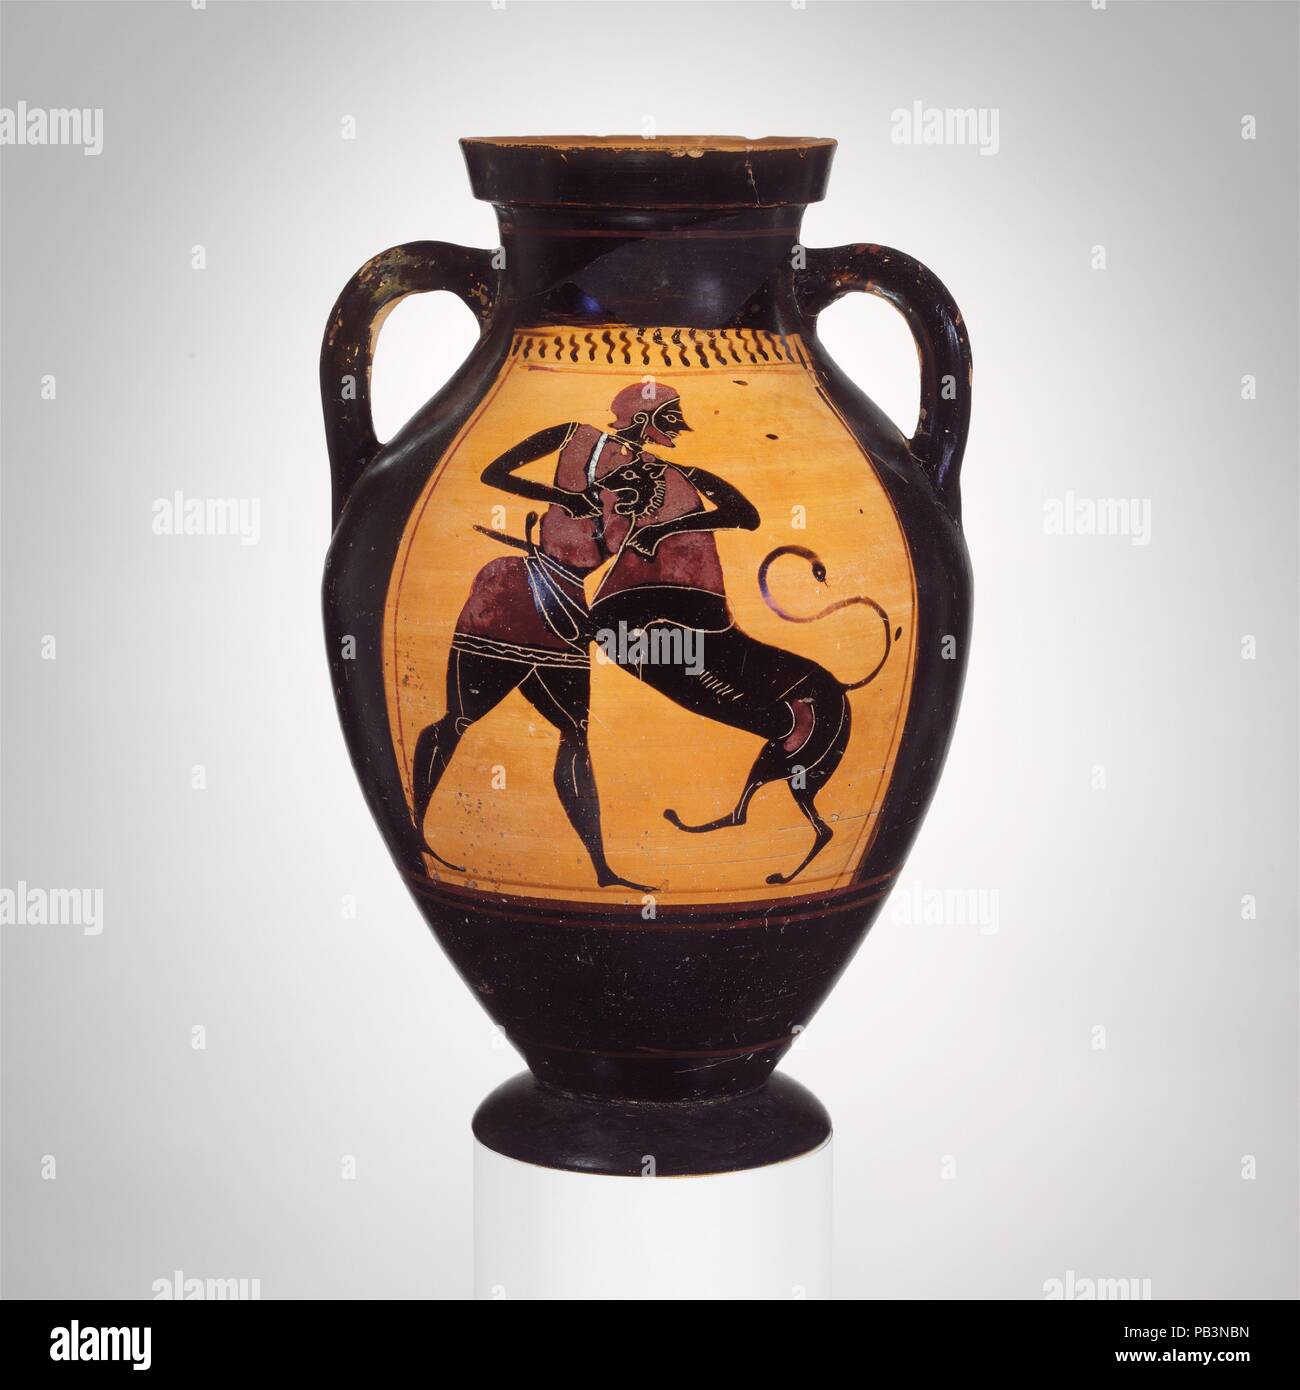 Terracotta amphora (jar). Culture: Greek, Attic. Dimensions: H. 10 9/16 in. (26.9 cm). Date: ca. 540 B.C..  Obverse and reverse, Herakles and the Nemean lion  Within the elongated shape of the amphora, the panel has been stretched proportionately to accommodate the pair of combatants. Although we know the outcome of the struggle, the artist characterized it effectively by showing man and lion as equally matched. Museum: Metropolitan Museum of Art, New York, USA. Stock Photo